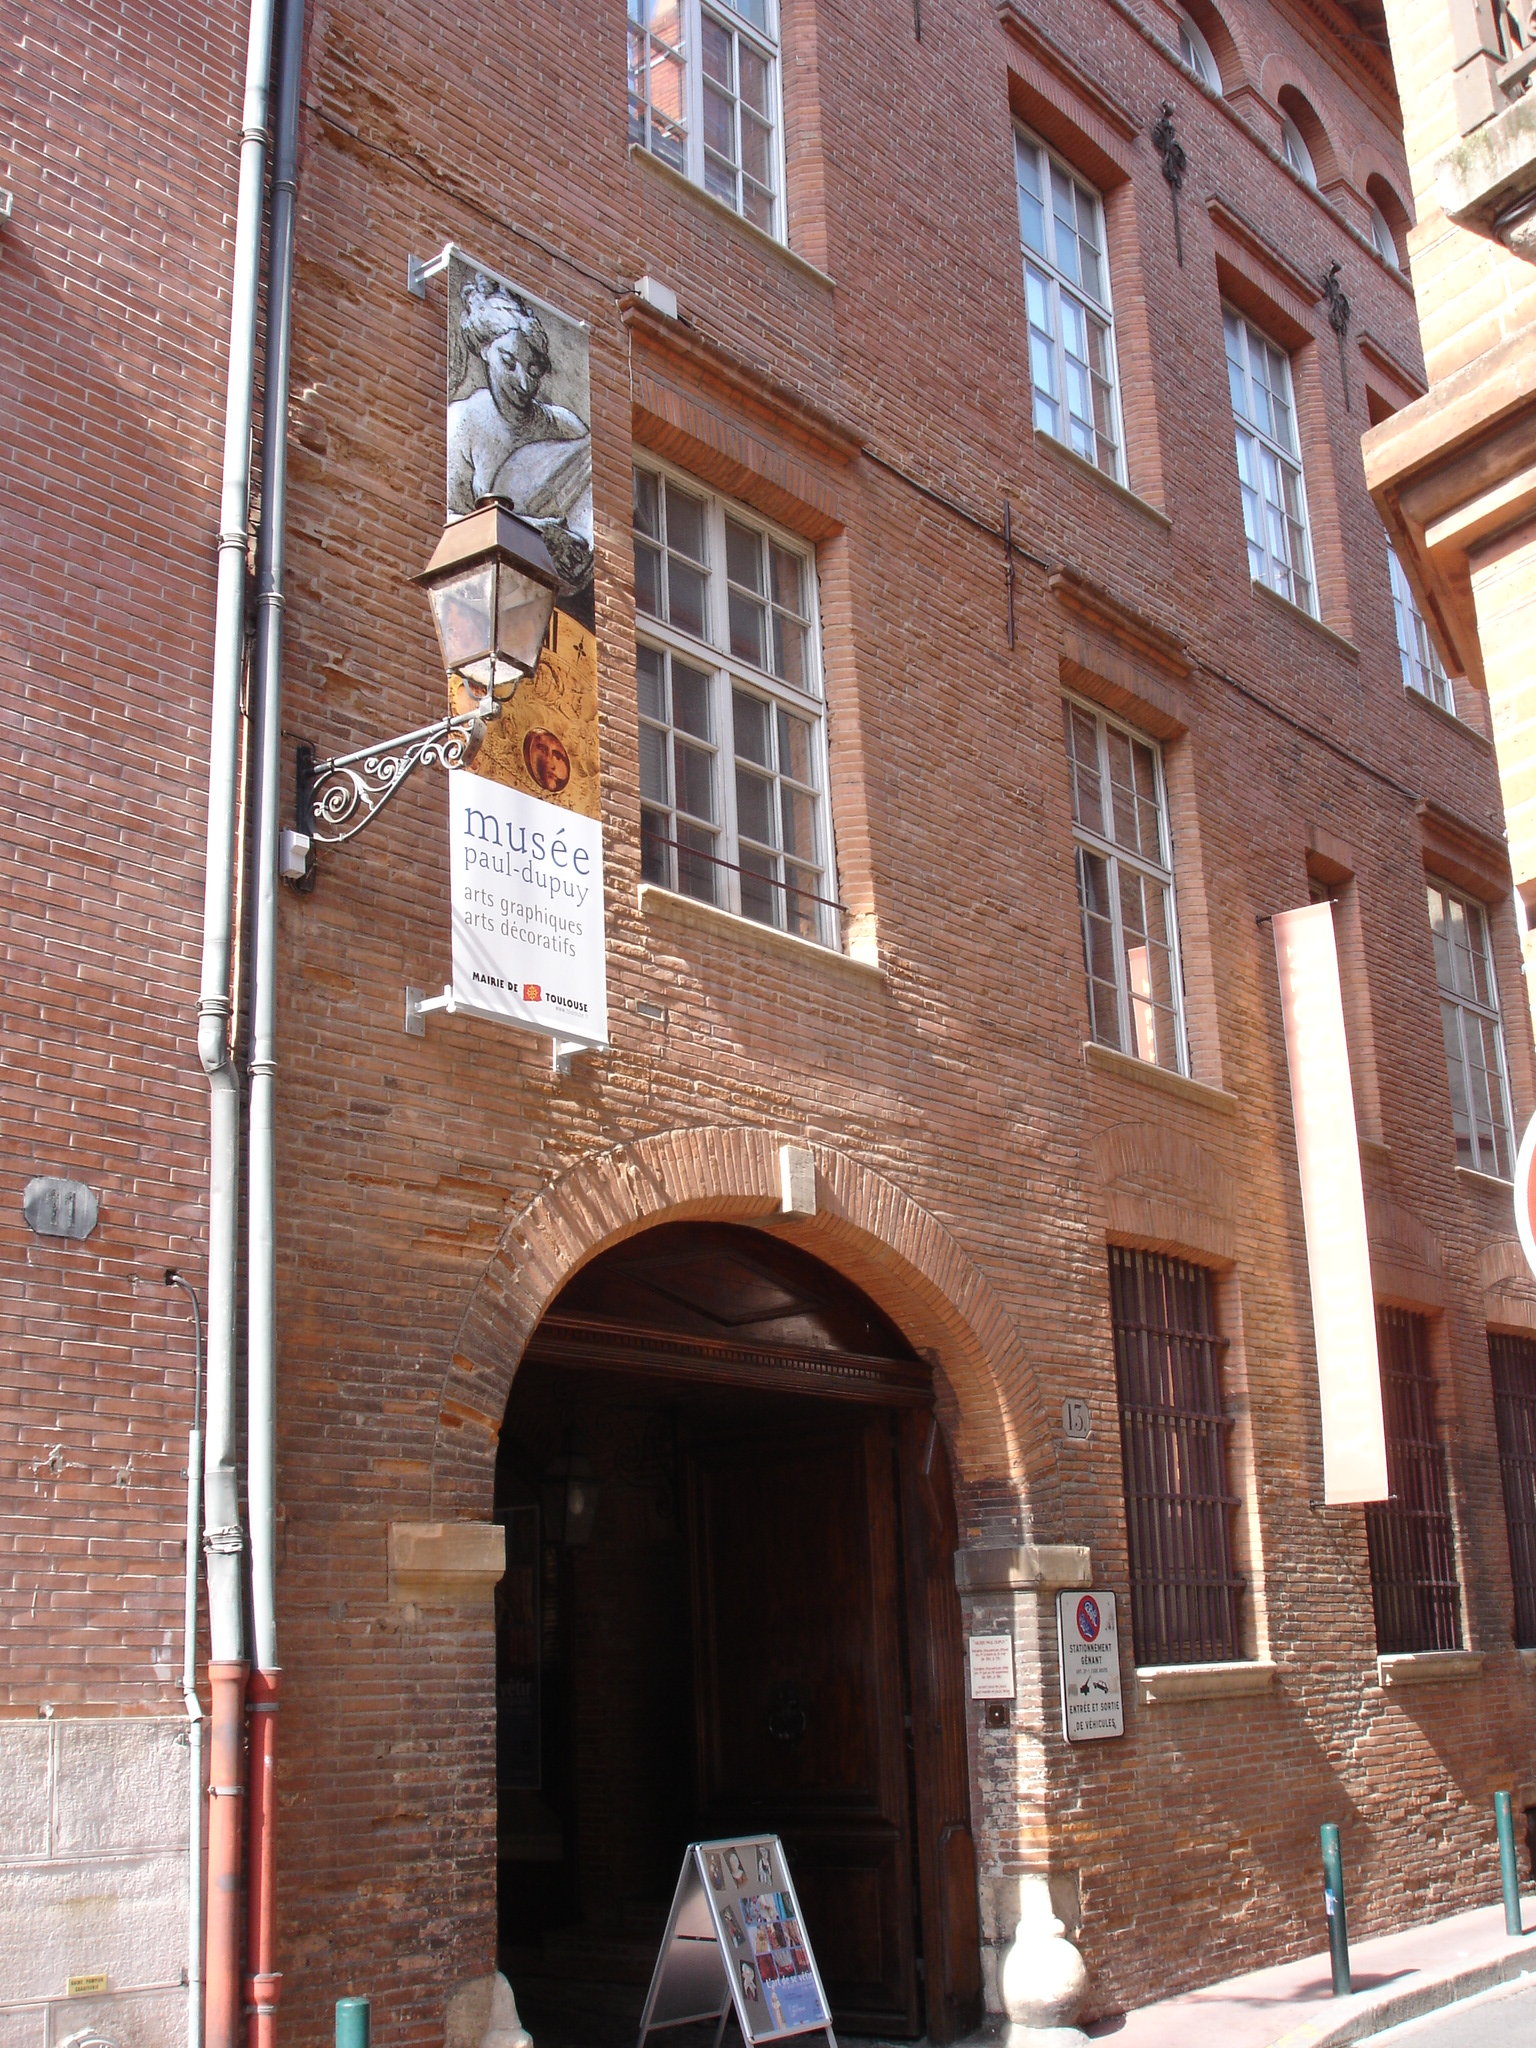 750-toulouse_musee_paul_dupuy.jpg